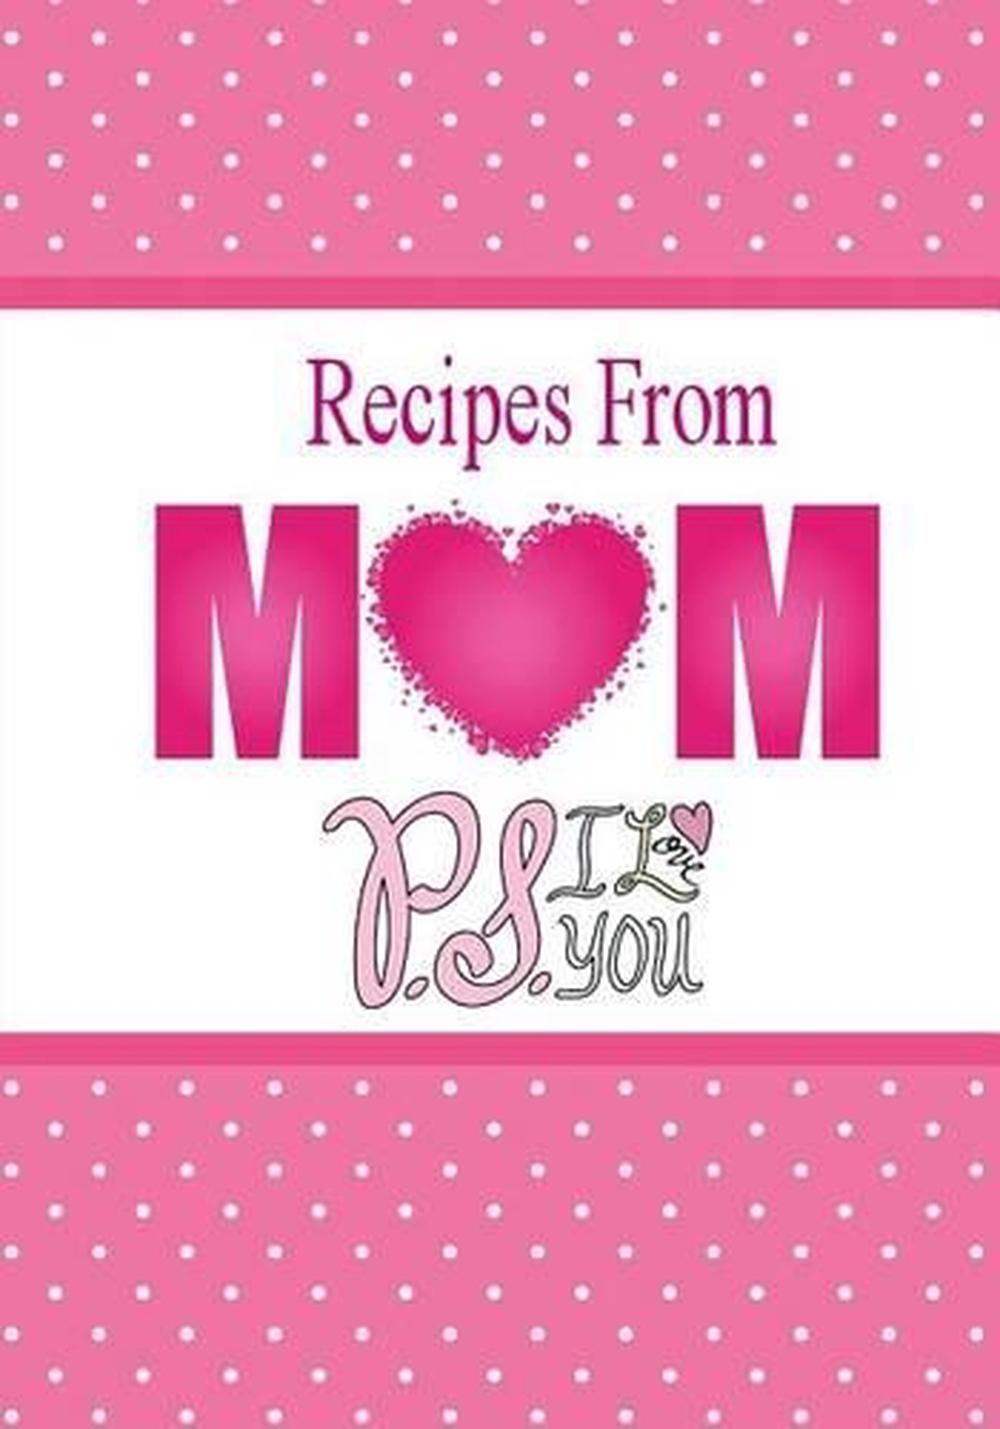 Itsy Bitsy The Blog place A Recipe Book File for my Mom